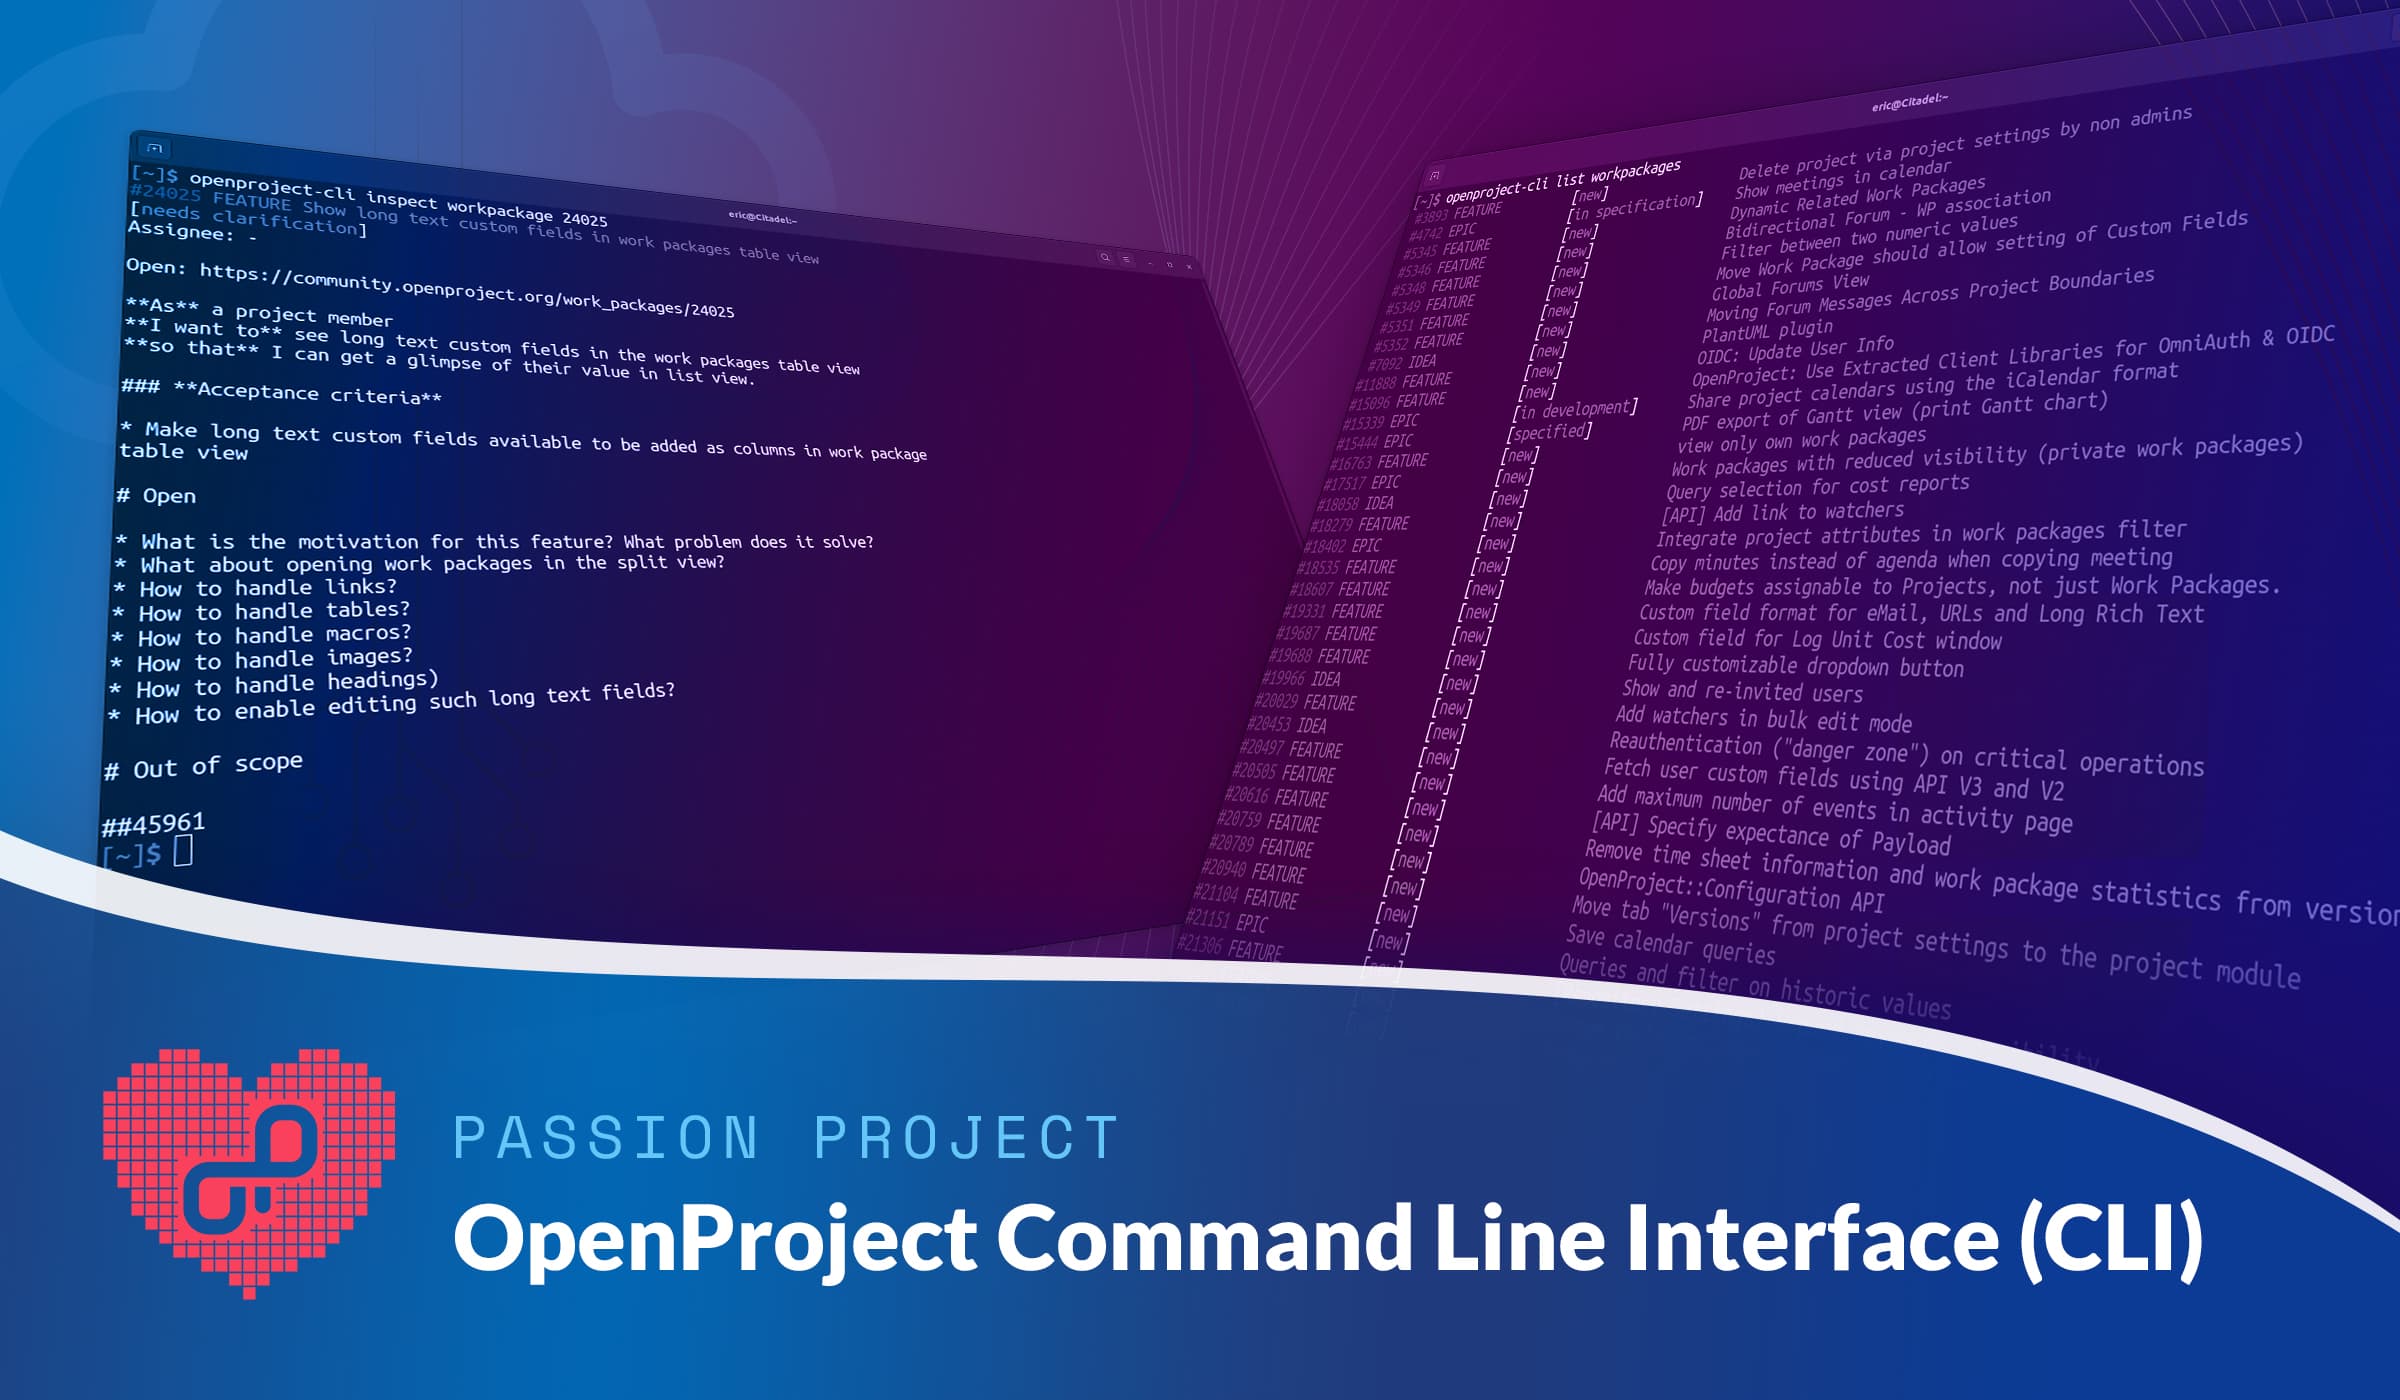 Passion project: Introduce OpenProject Command Line Interface (CLI)